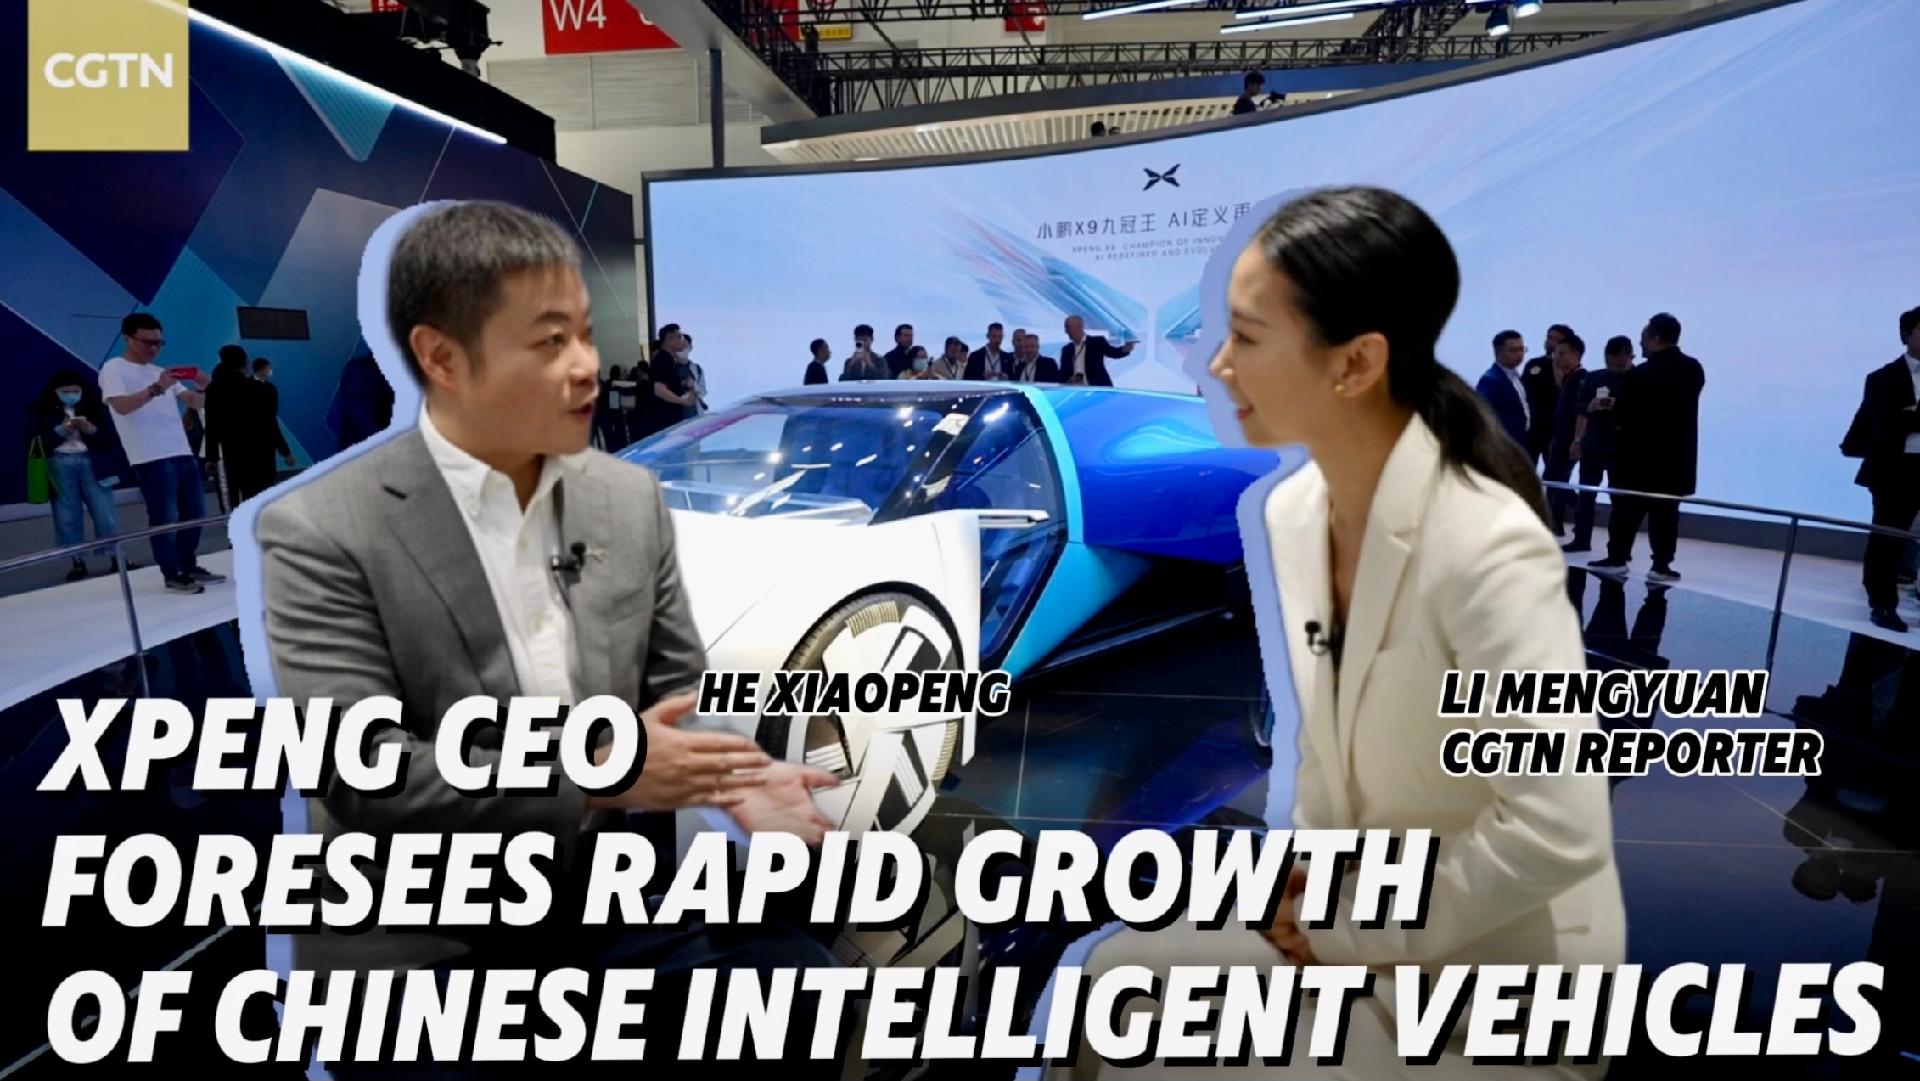 XPENG CEO foresees rapid growth of Chinese intelligent vehicles [Video]